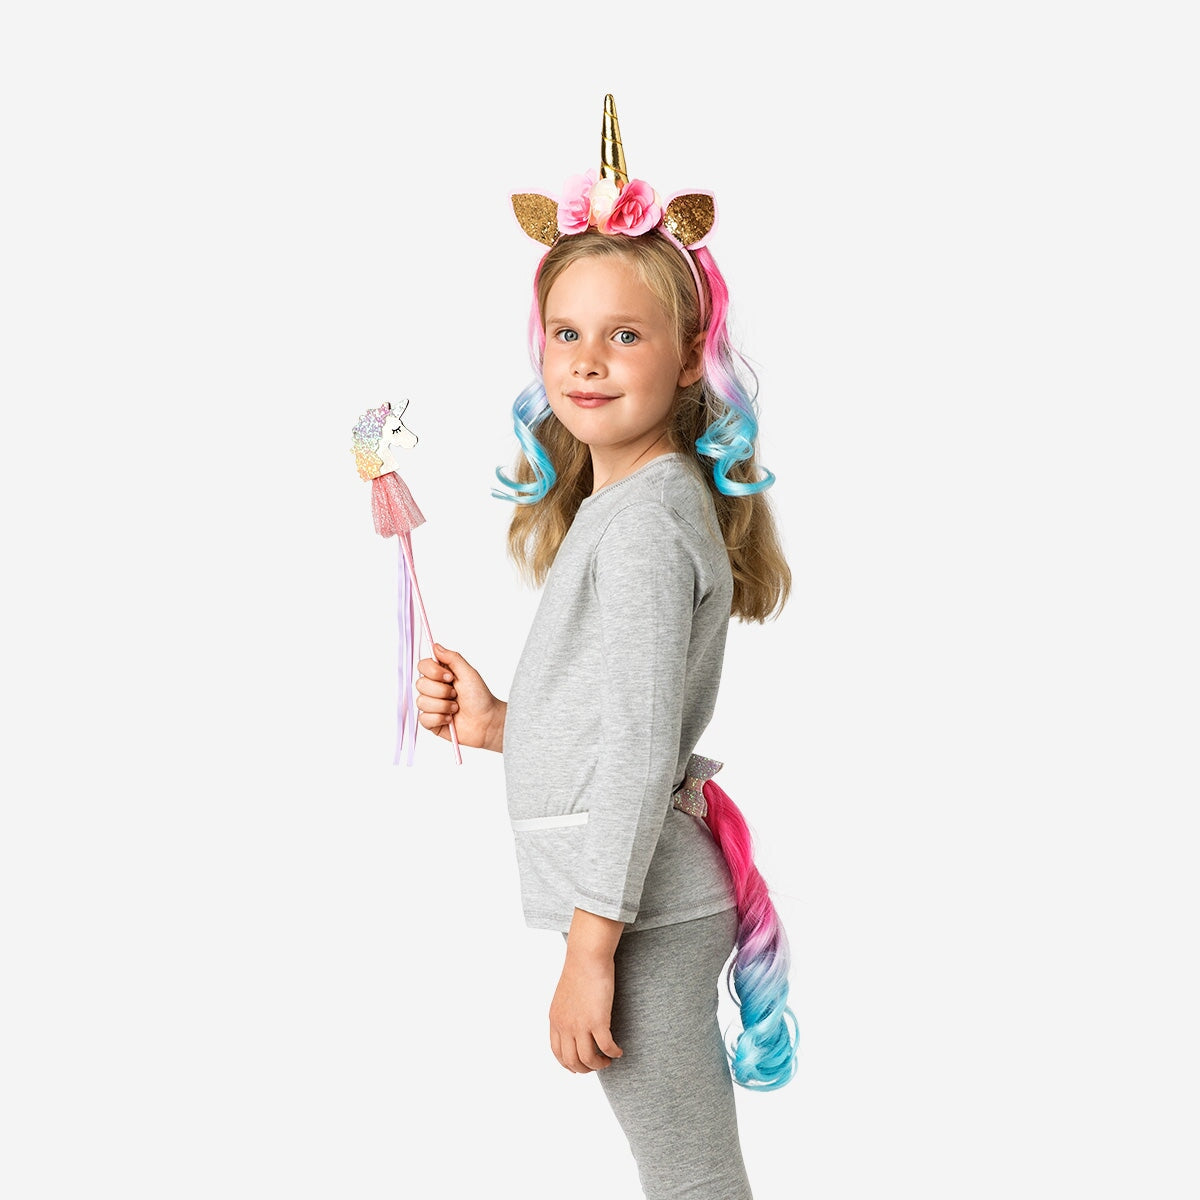 Unicorn costume accessories. For kids Party Flying Tiger Copenhagen 